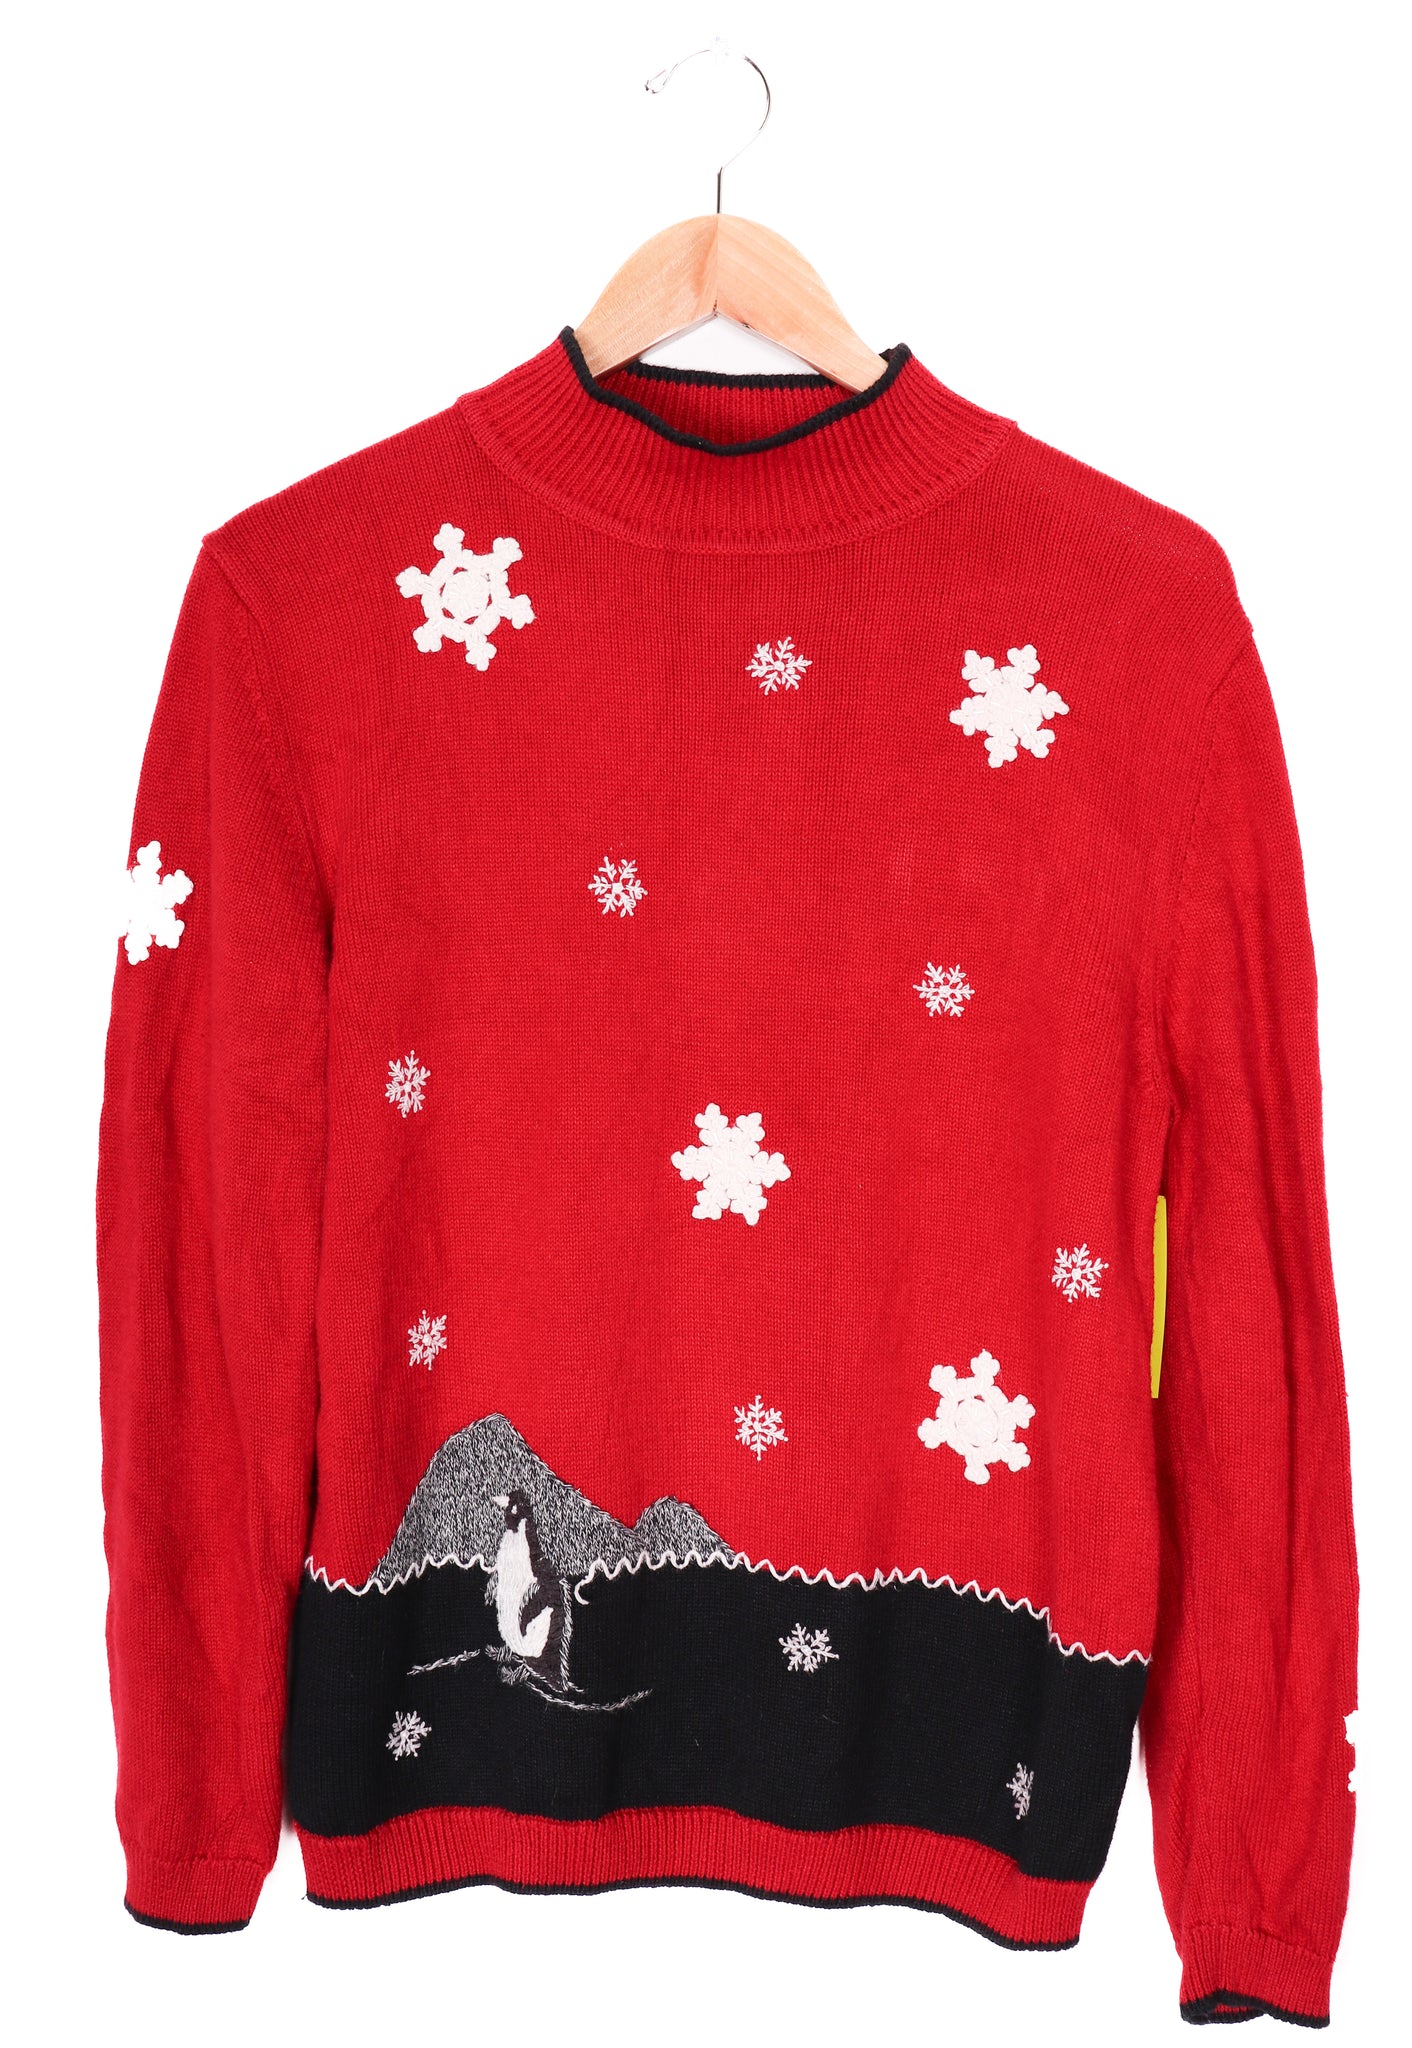 Embroidered Snowflakes and Penguin Sweater